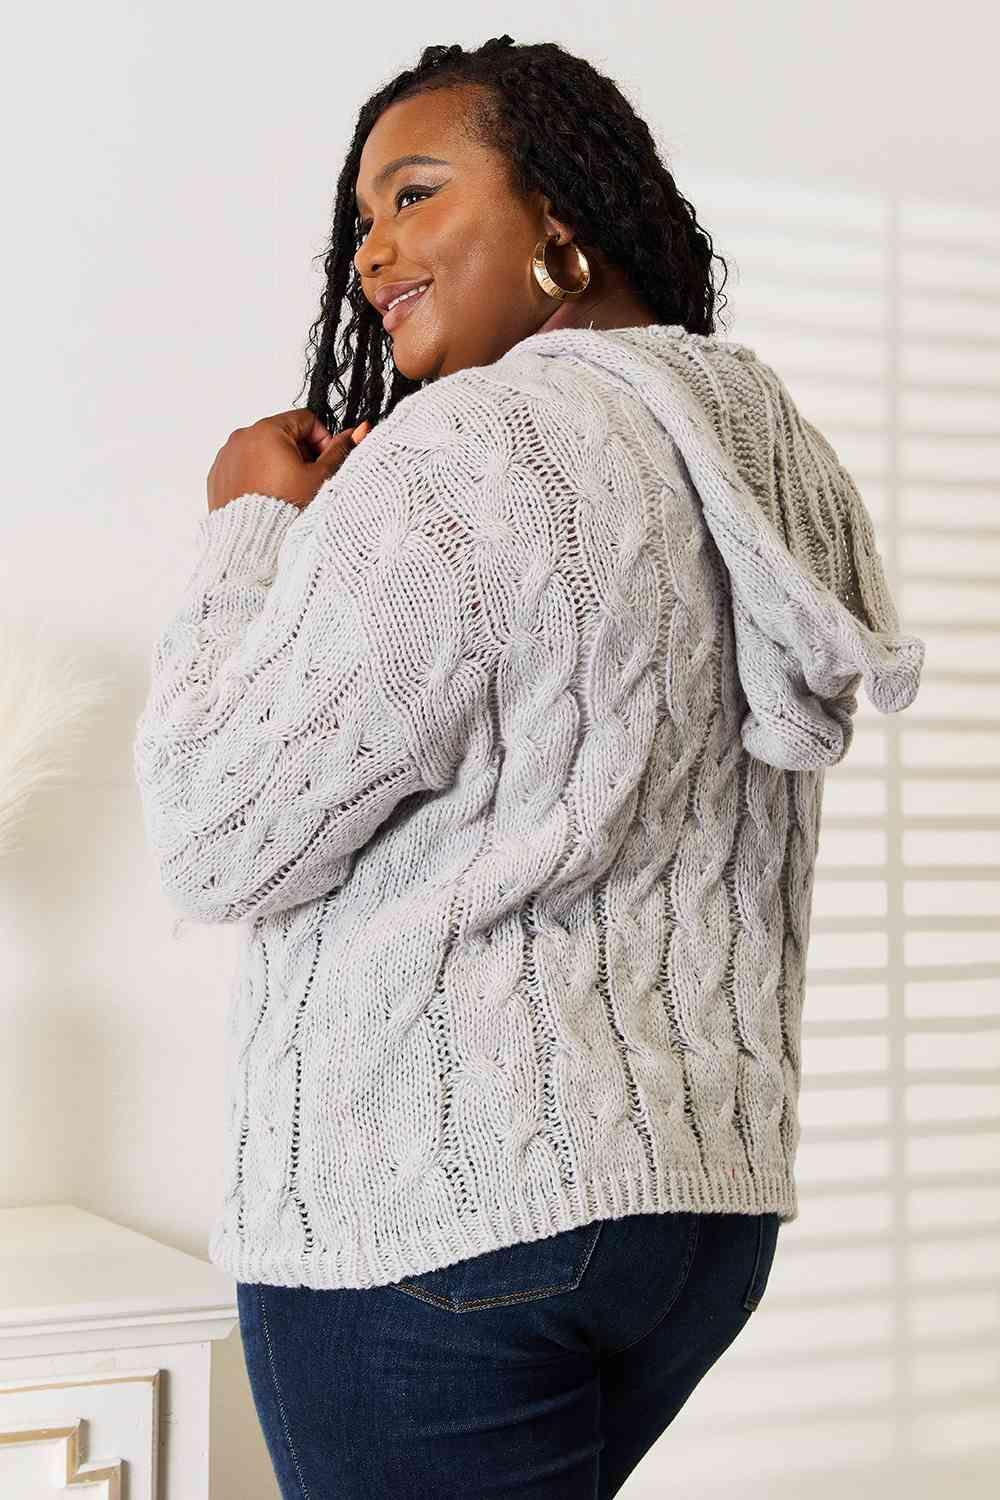 Woven Right Cable-Knit Hooded Sweater - Bona Fide Fashion